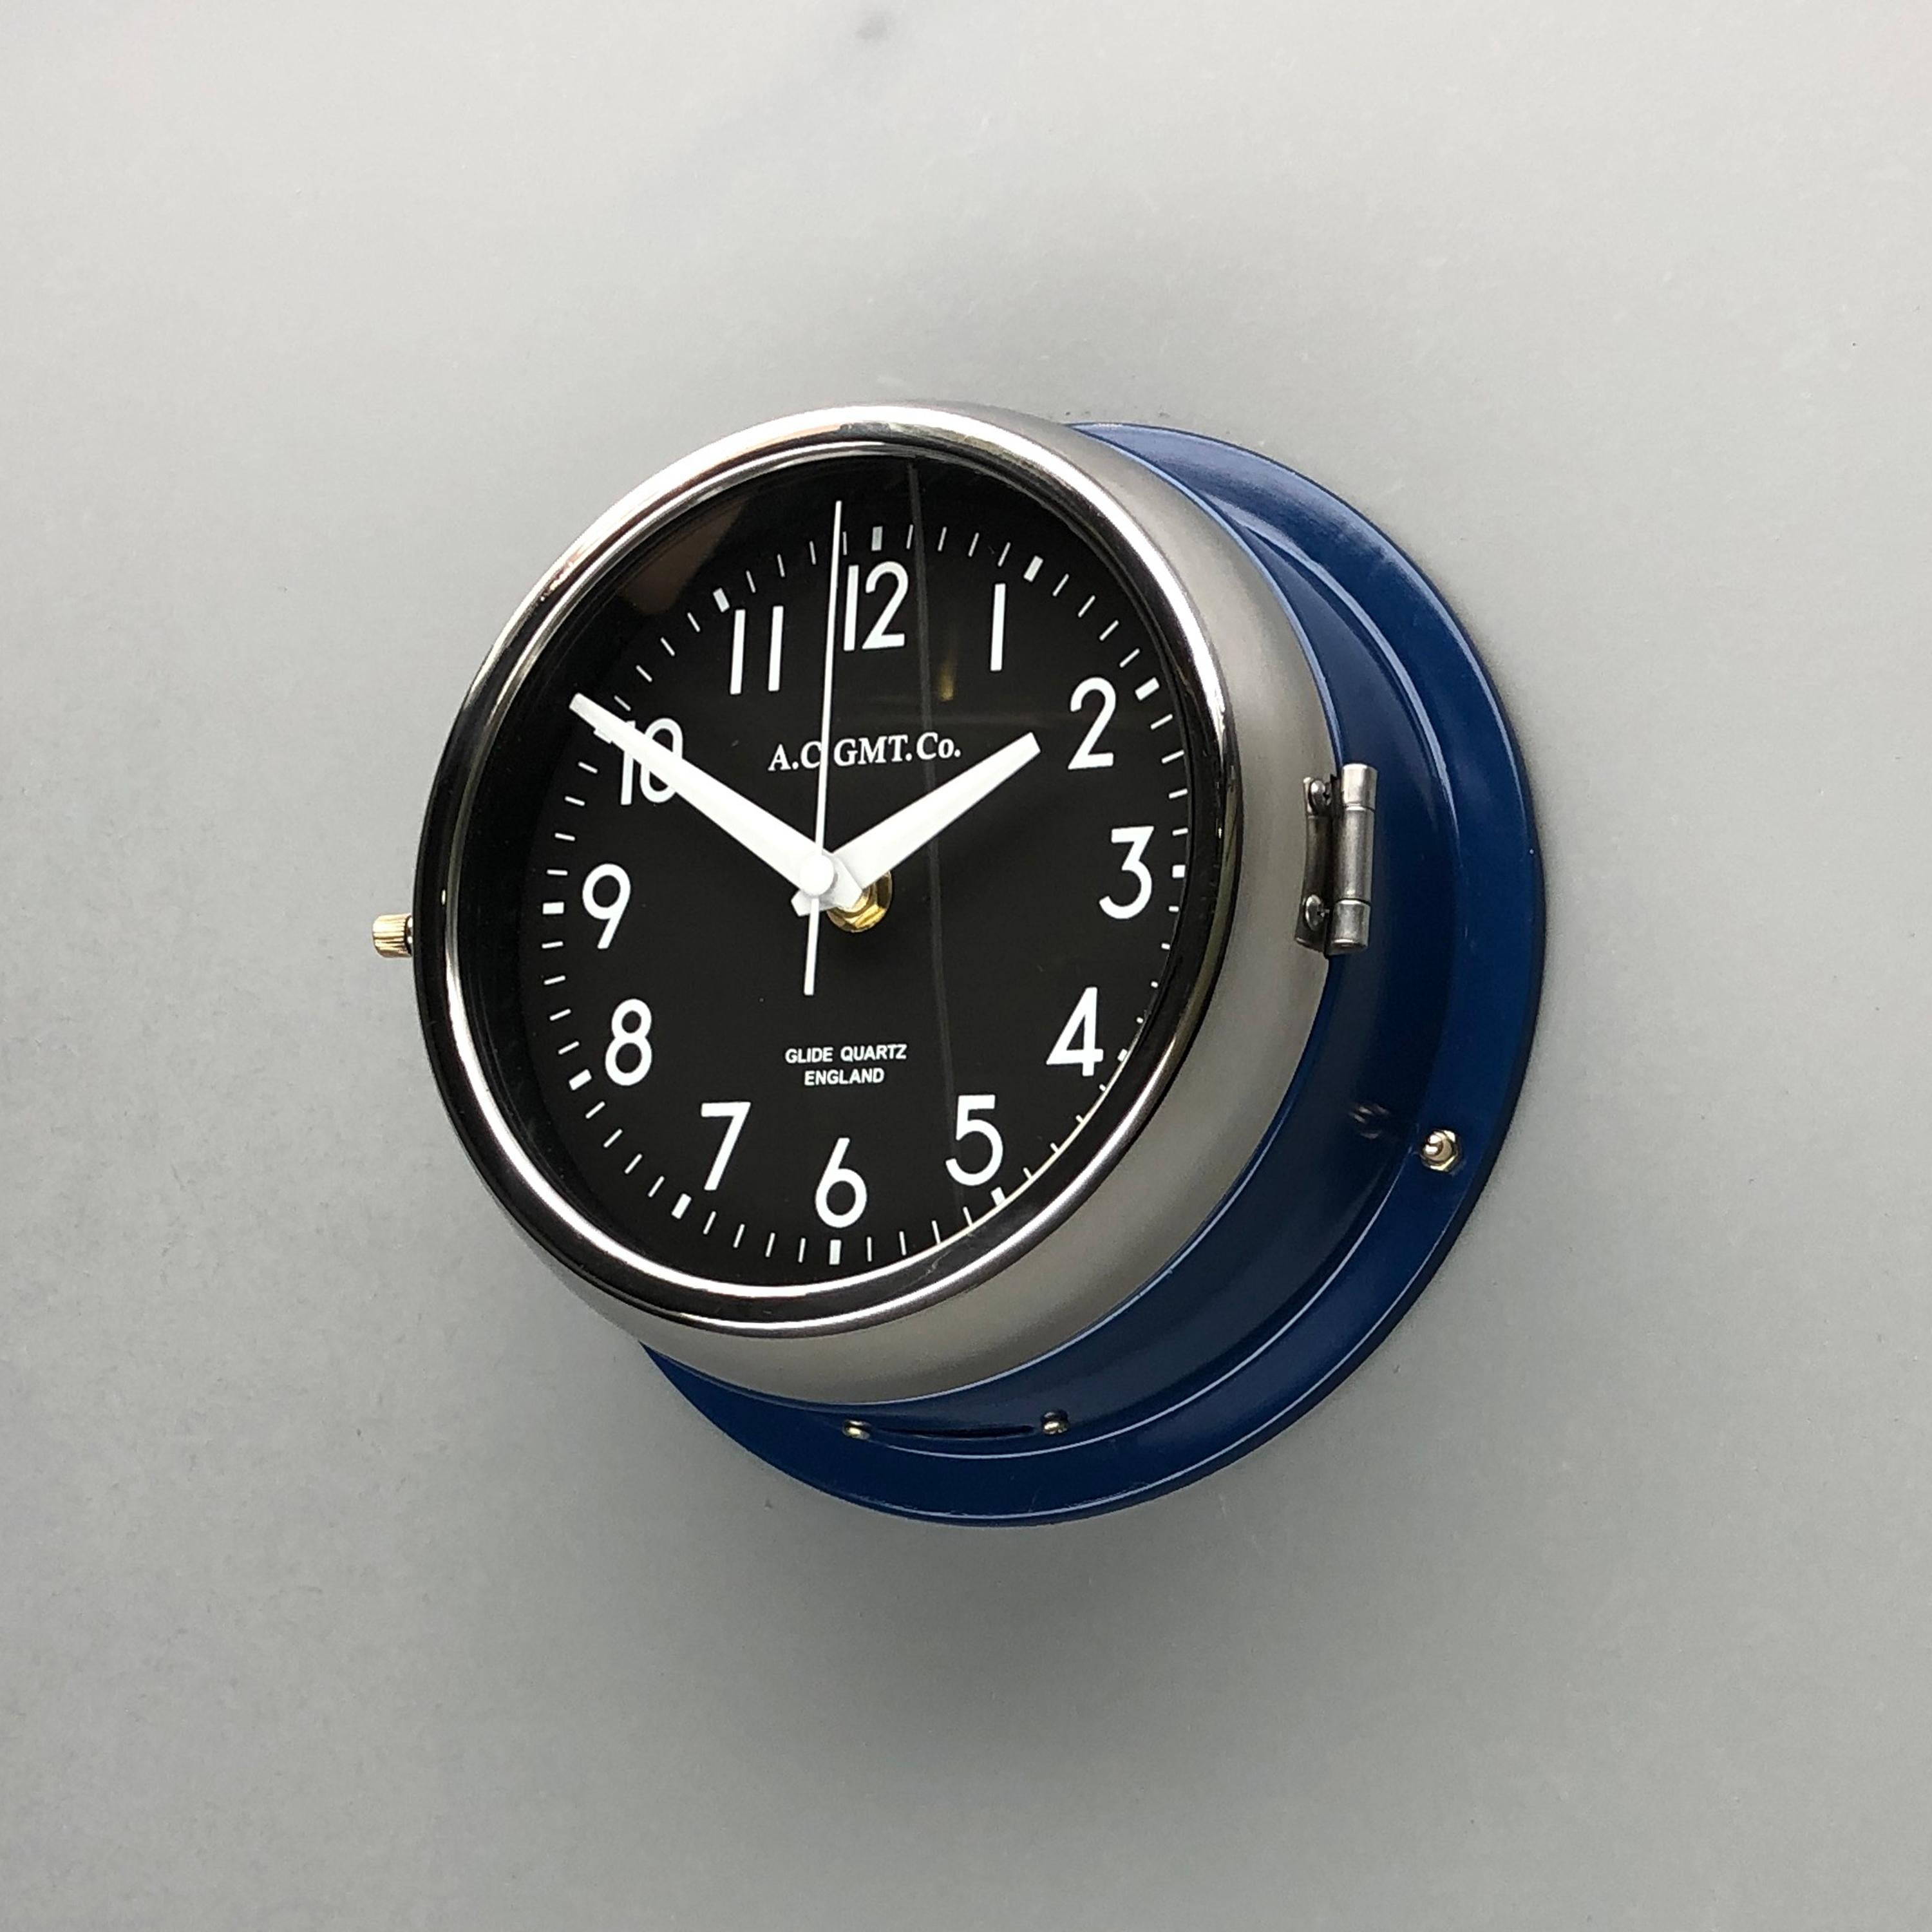 English 1970s British Classic Blue & Chrome AC.GMT.Co. Industrial Wall Clock Black Dial For Sale